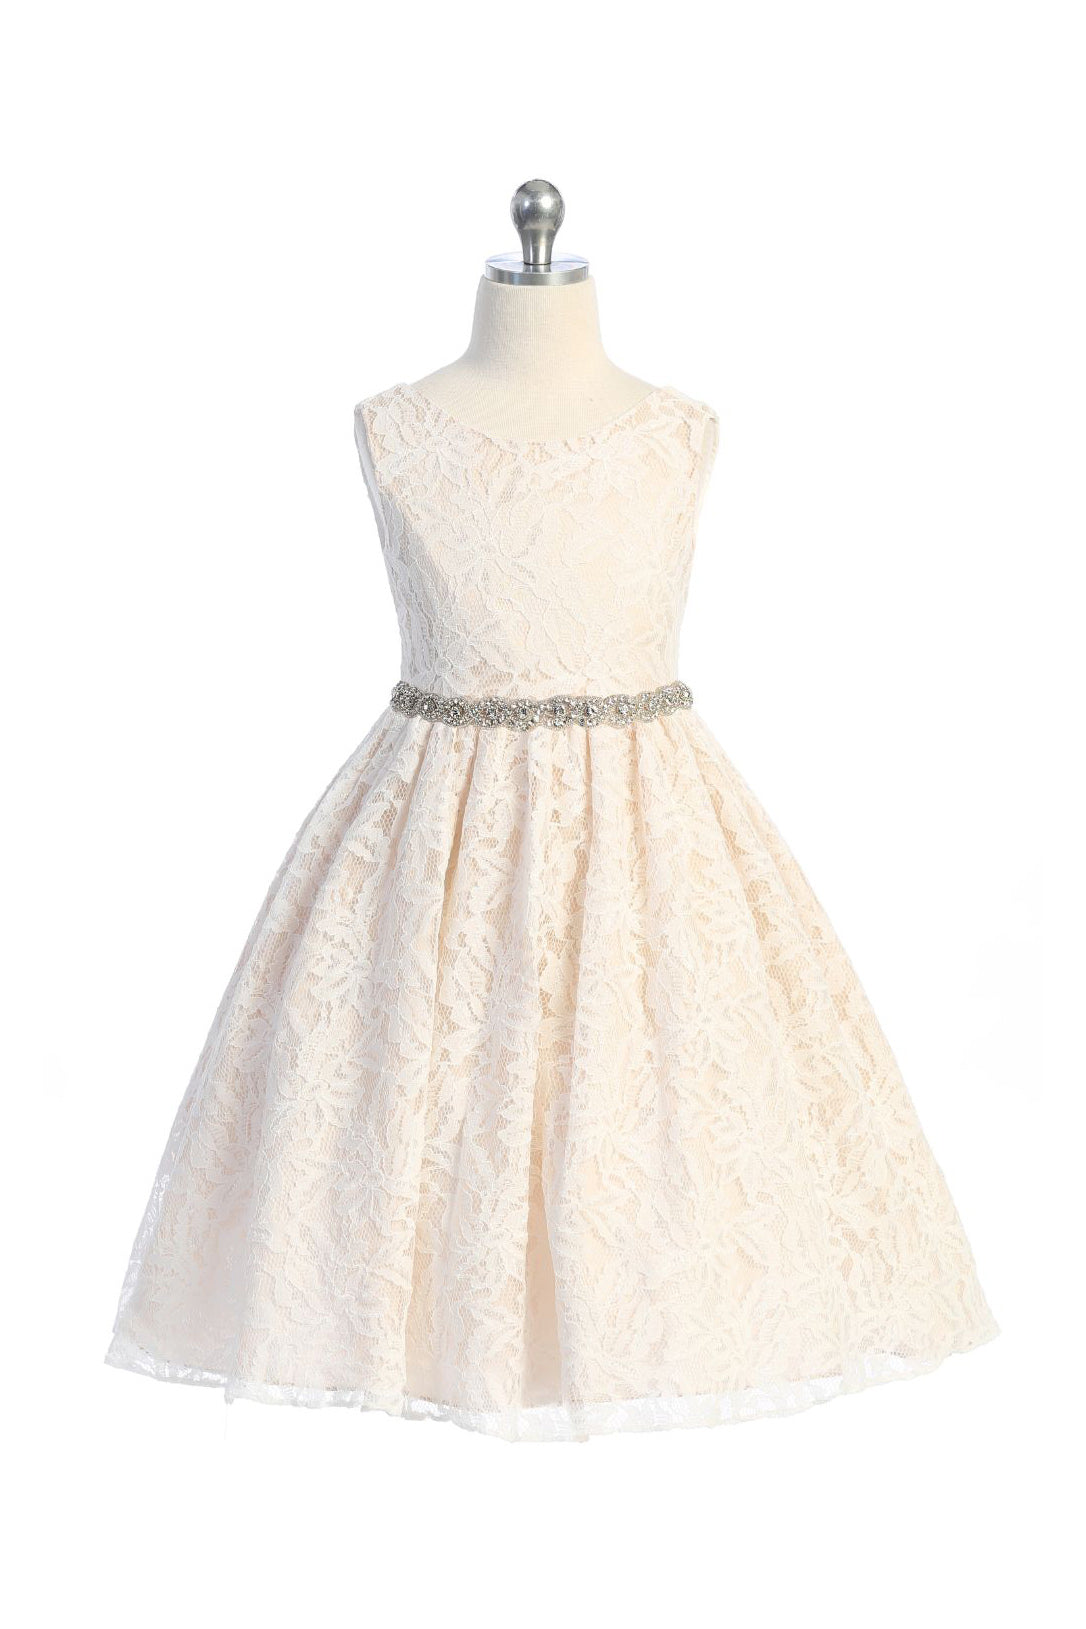 Lace V Back Bow Dress w/ Rhinestone Trim, Flower Girl Dress, Party Dress for Kids Get it now from Mommies Best Mall